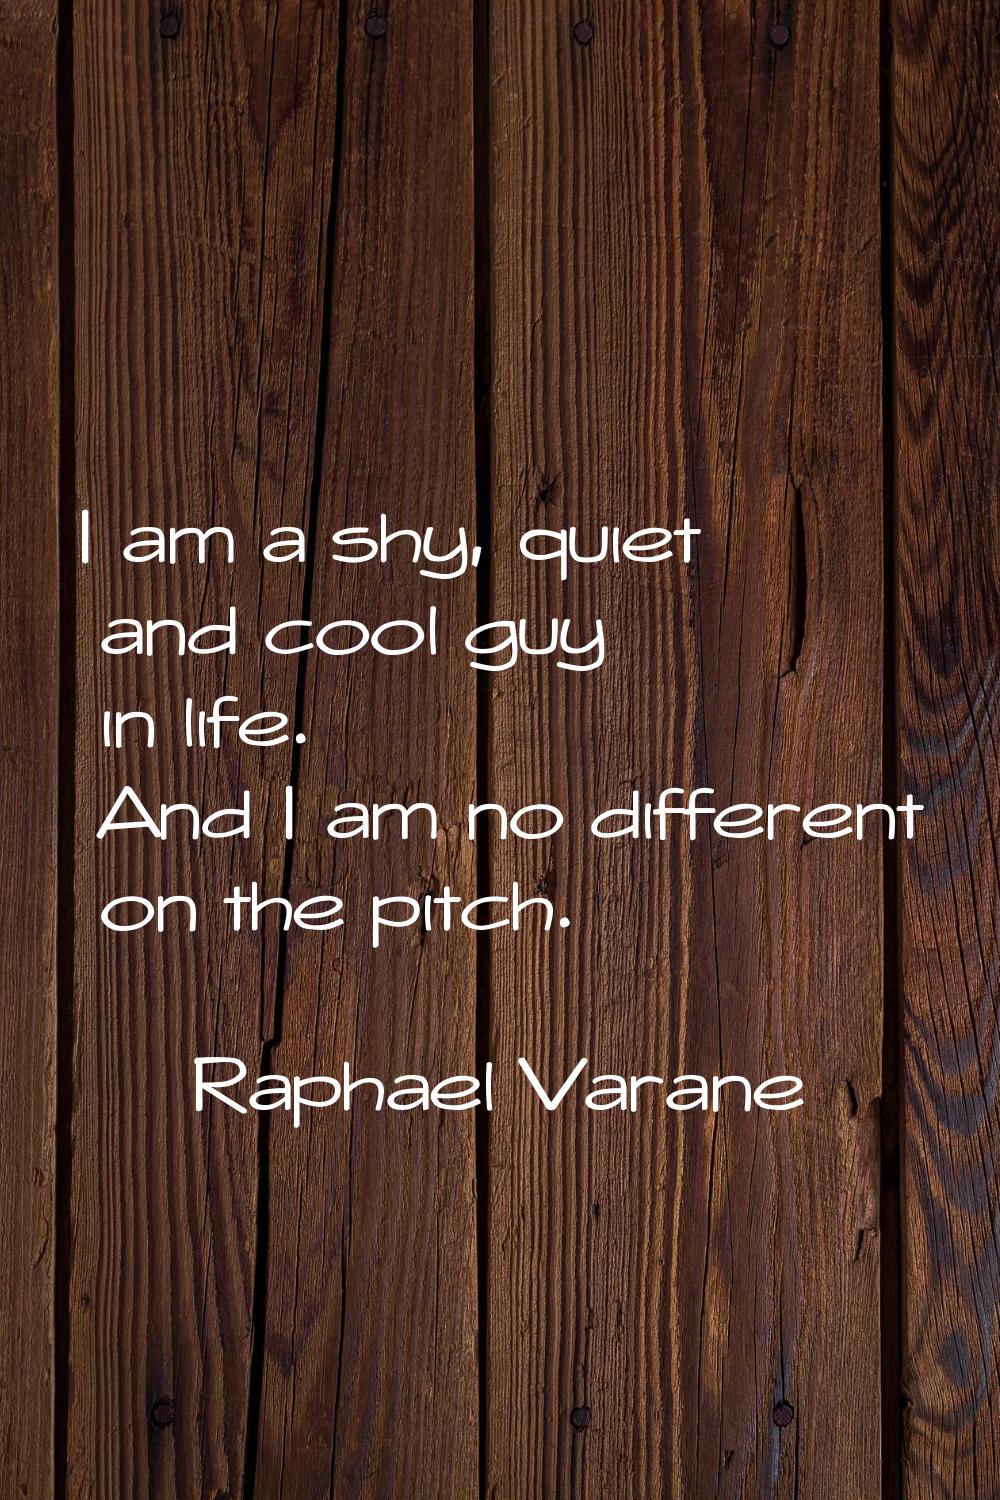 I am a shy, quiet and cool guy in life. And I am no different on the pitch.